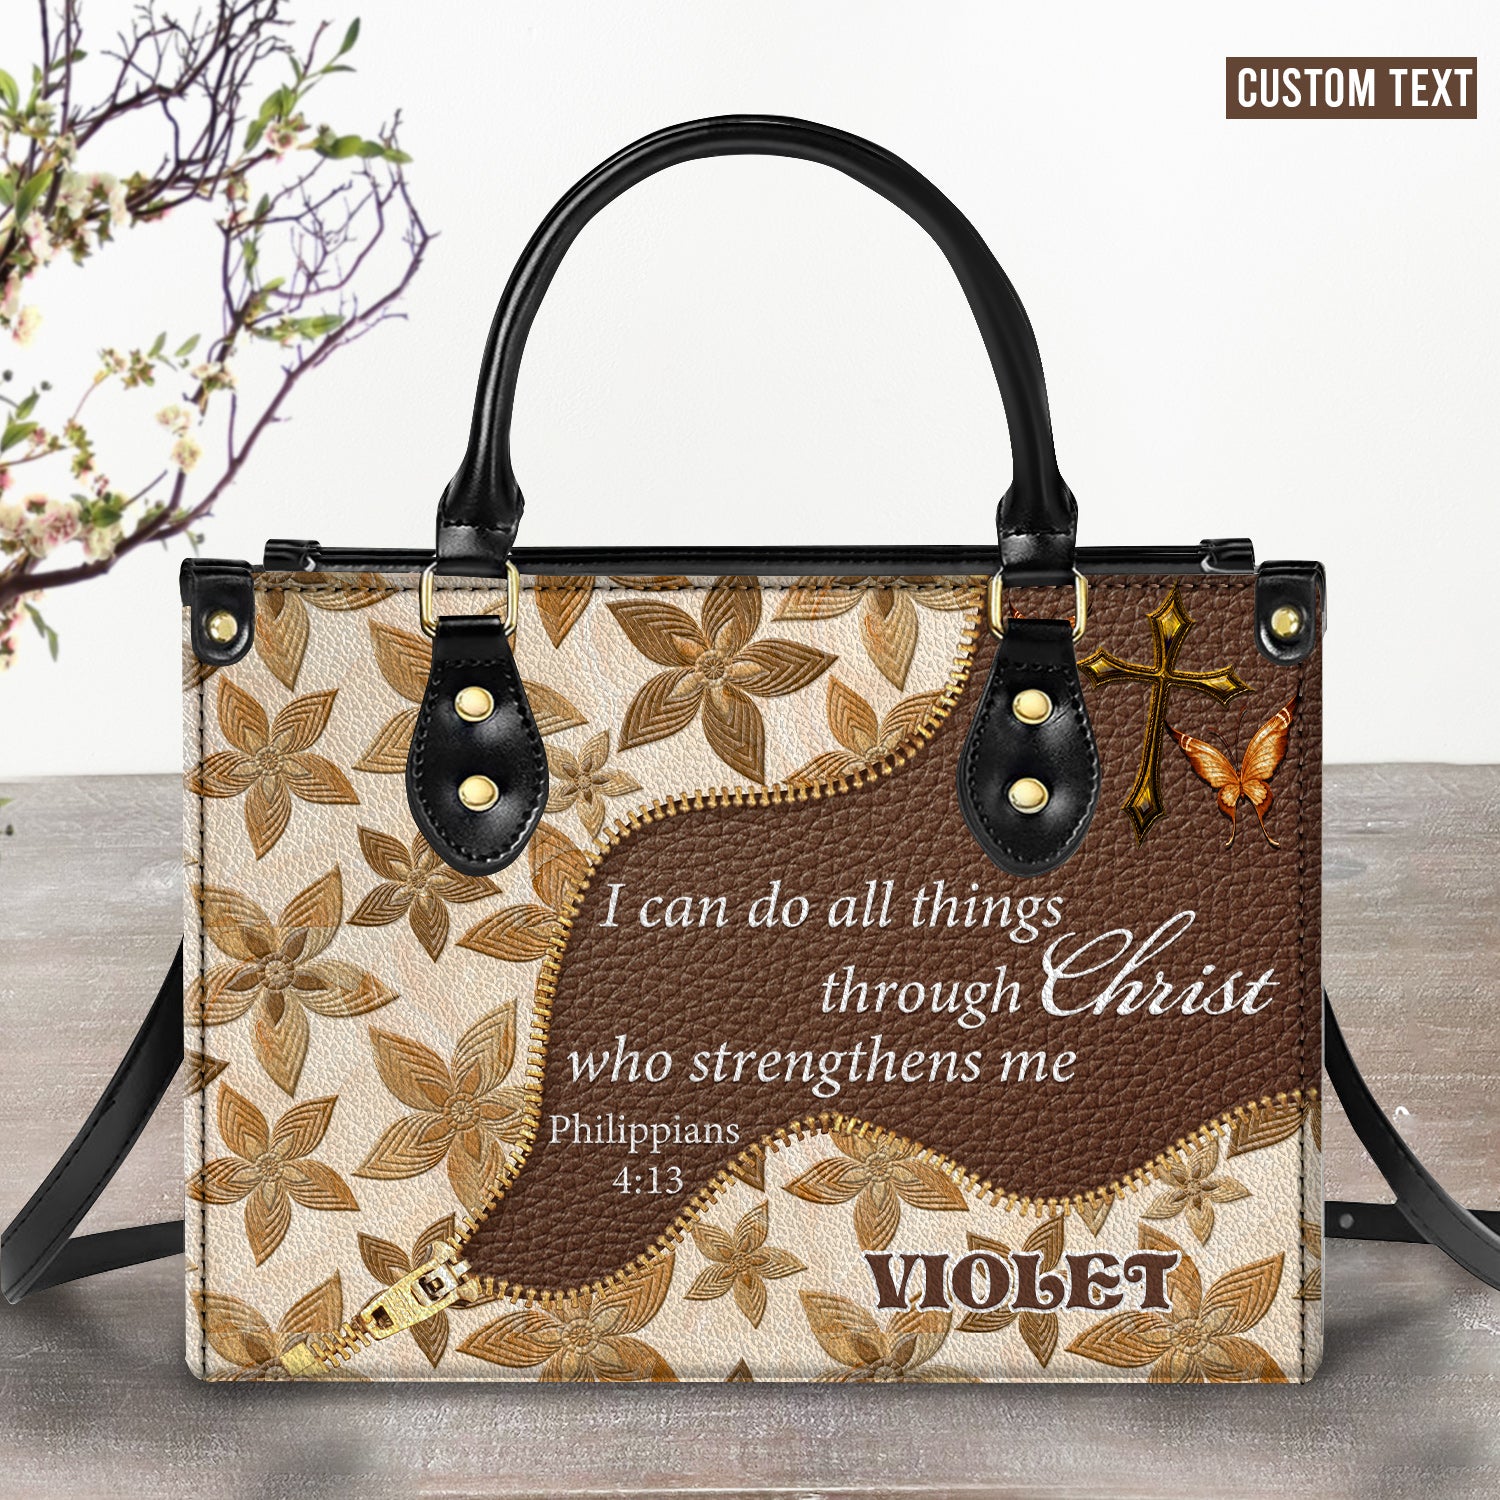 I can do all things Personalized Zippered Leather Handbag With Handle Christian Gift Religious Gift For Women